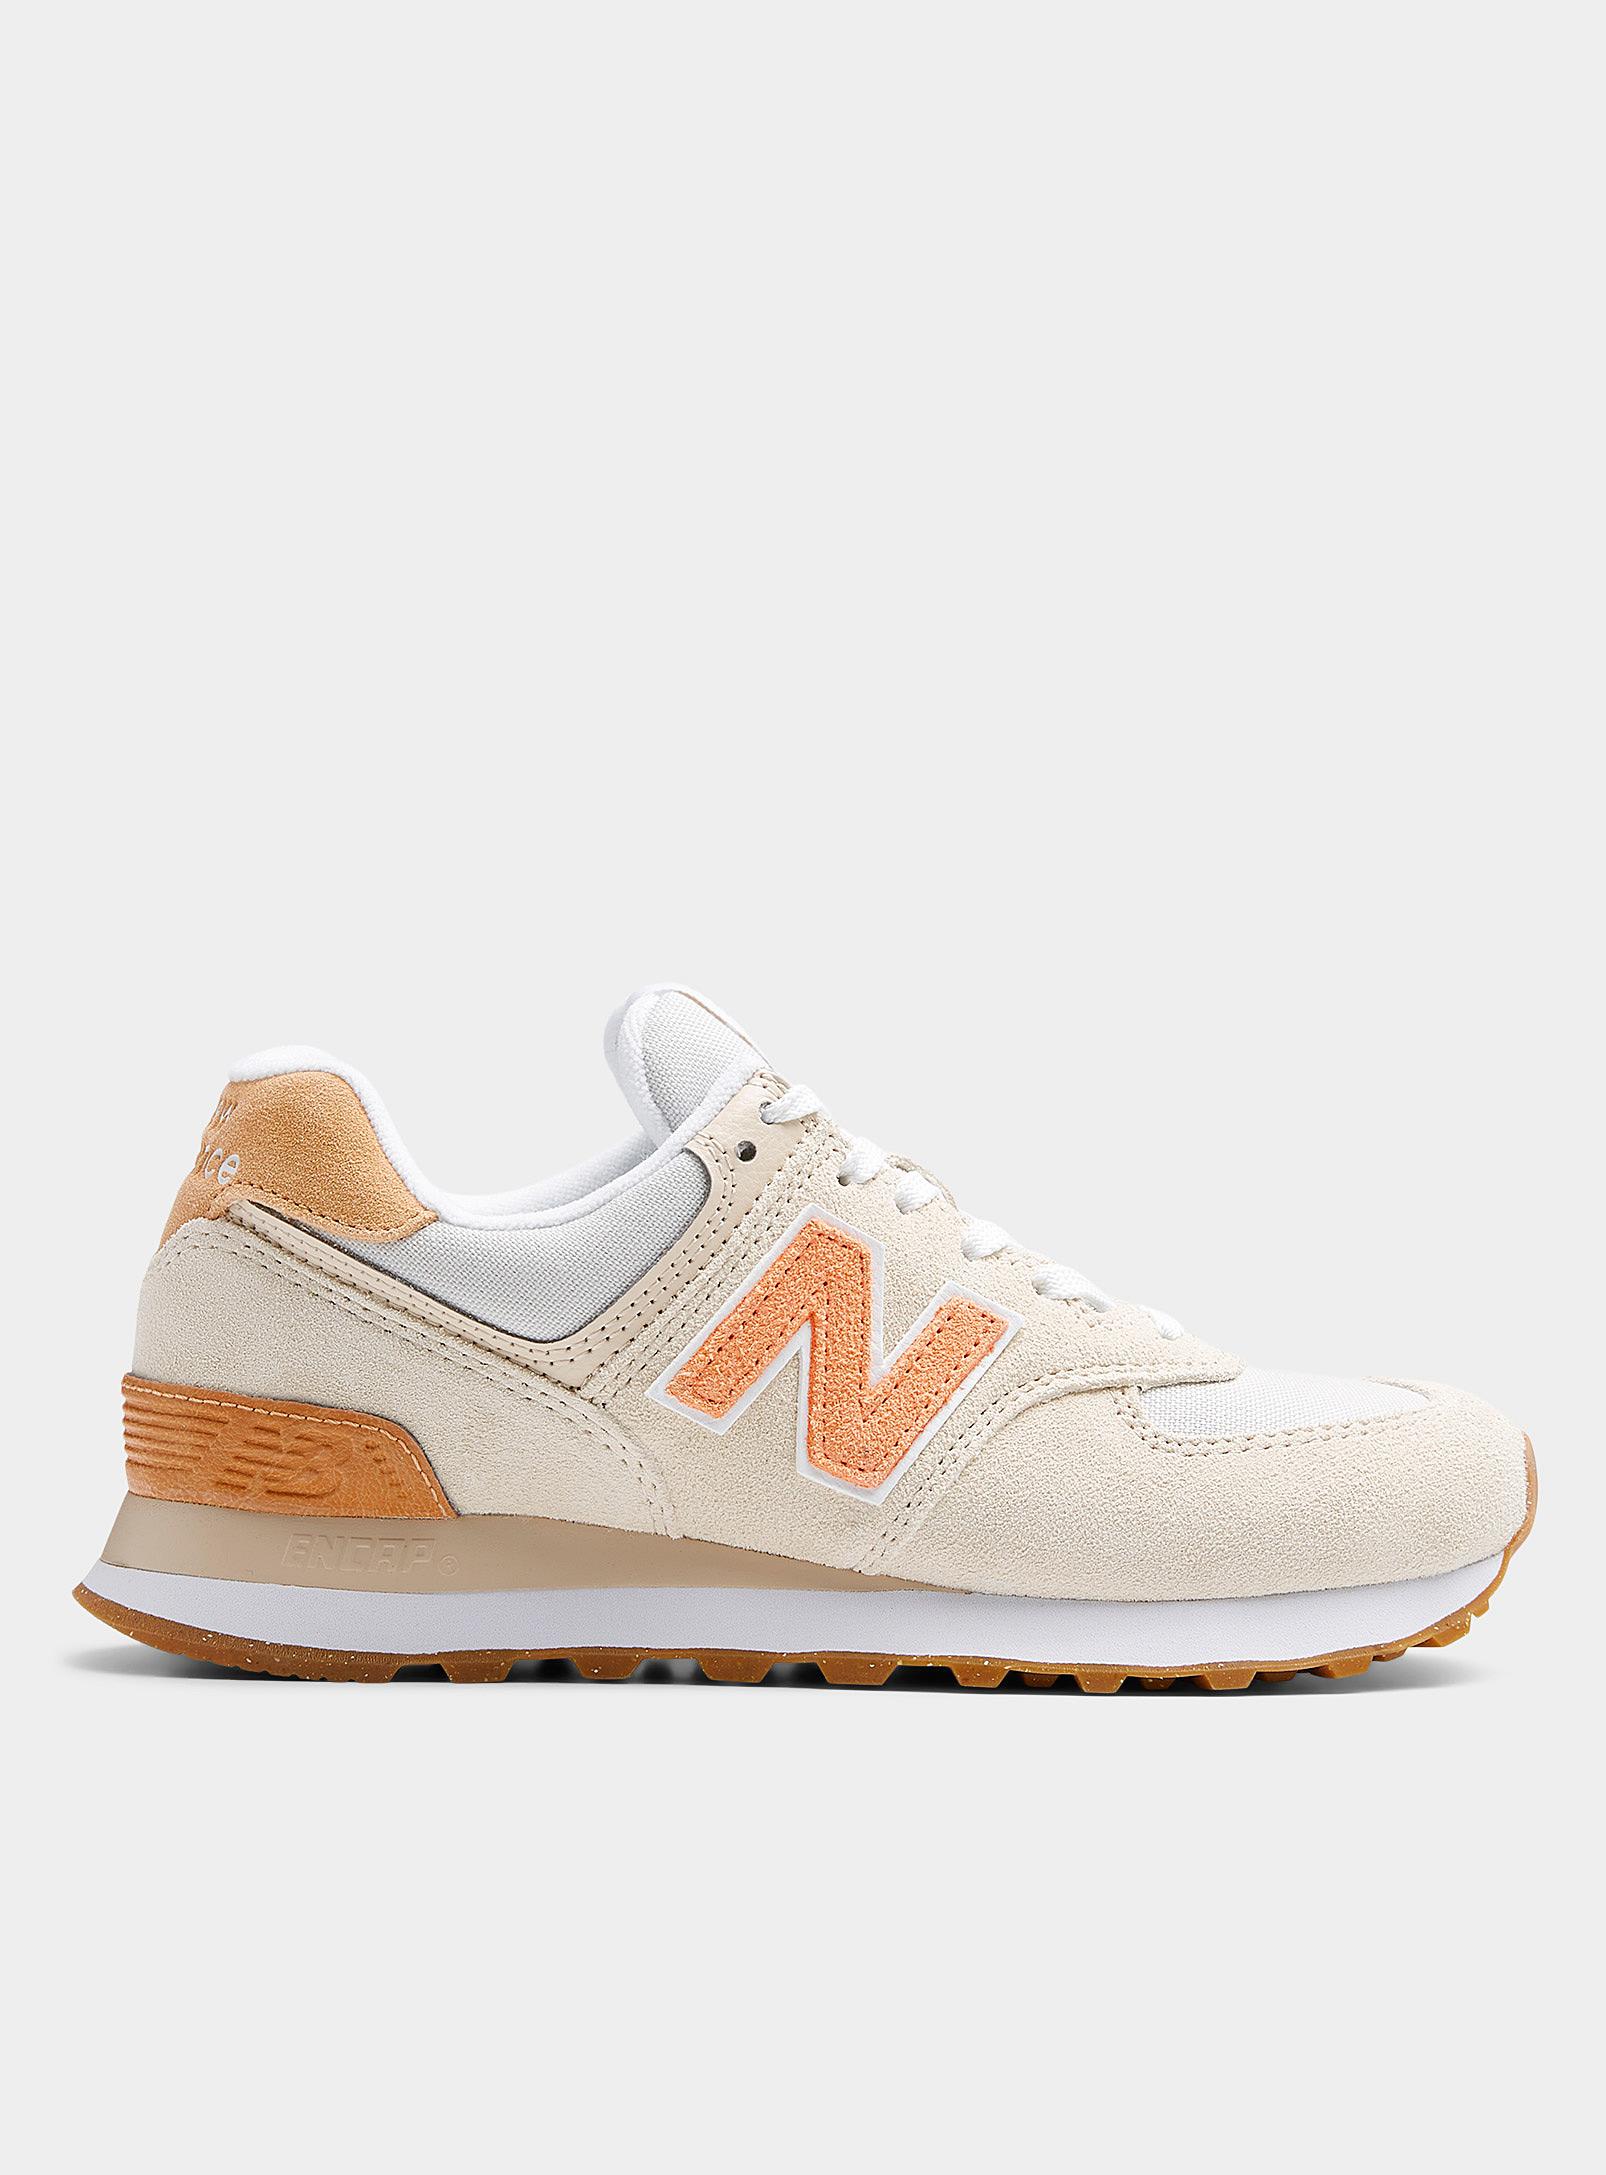 New Balance Ivory And Peach 574 Sneaker Women in Natural | Lyst